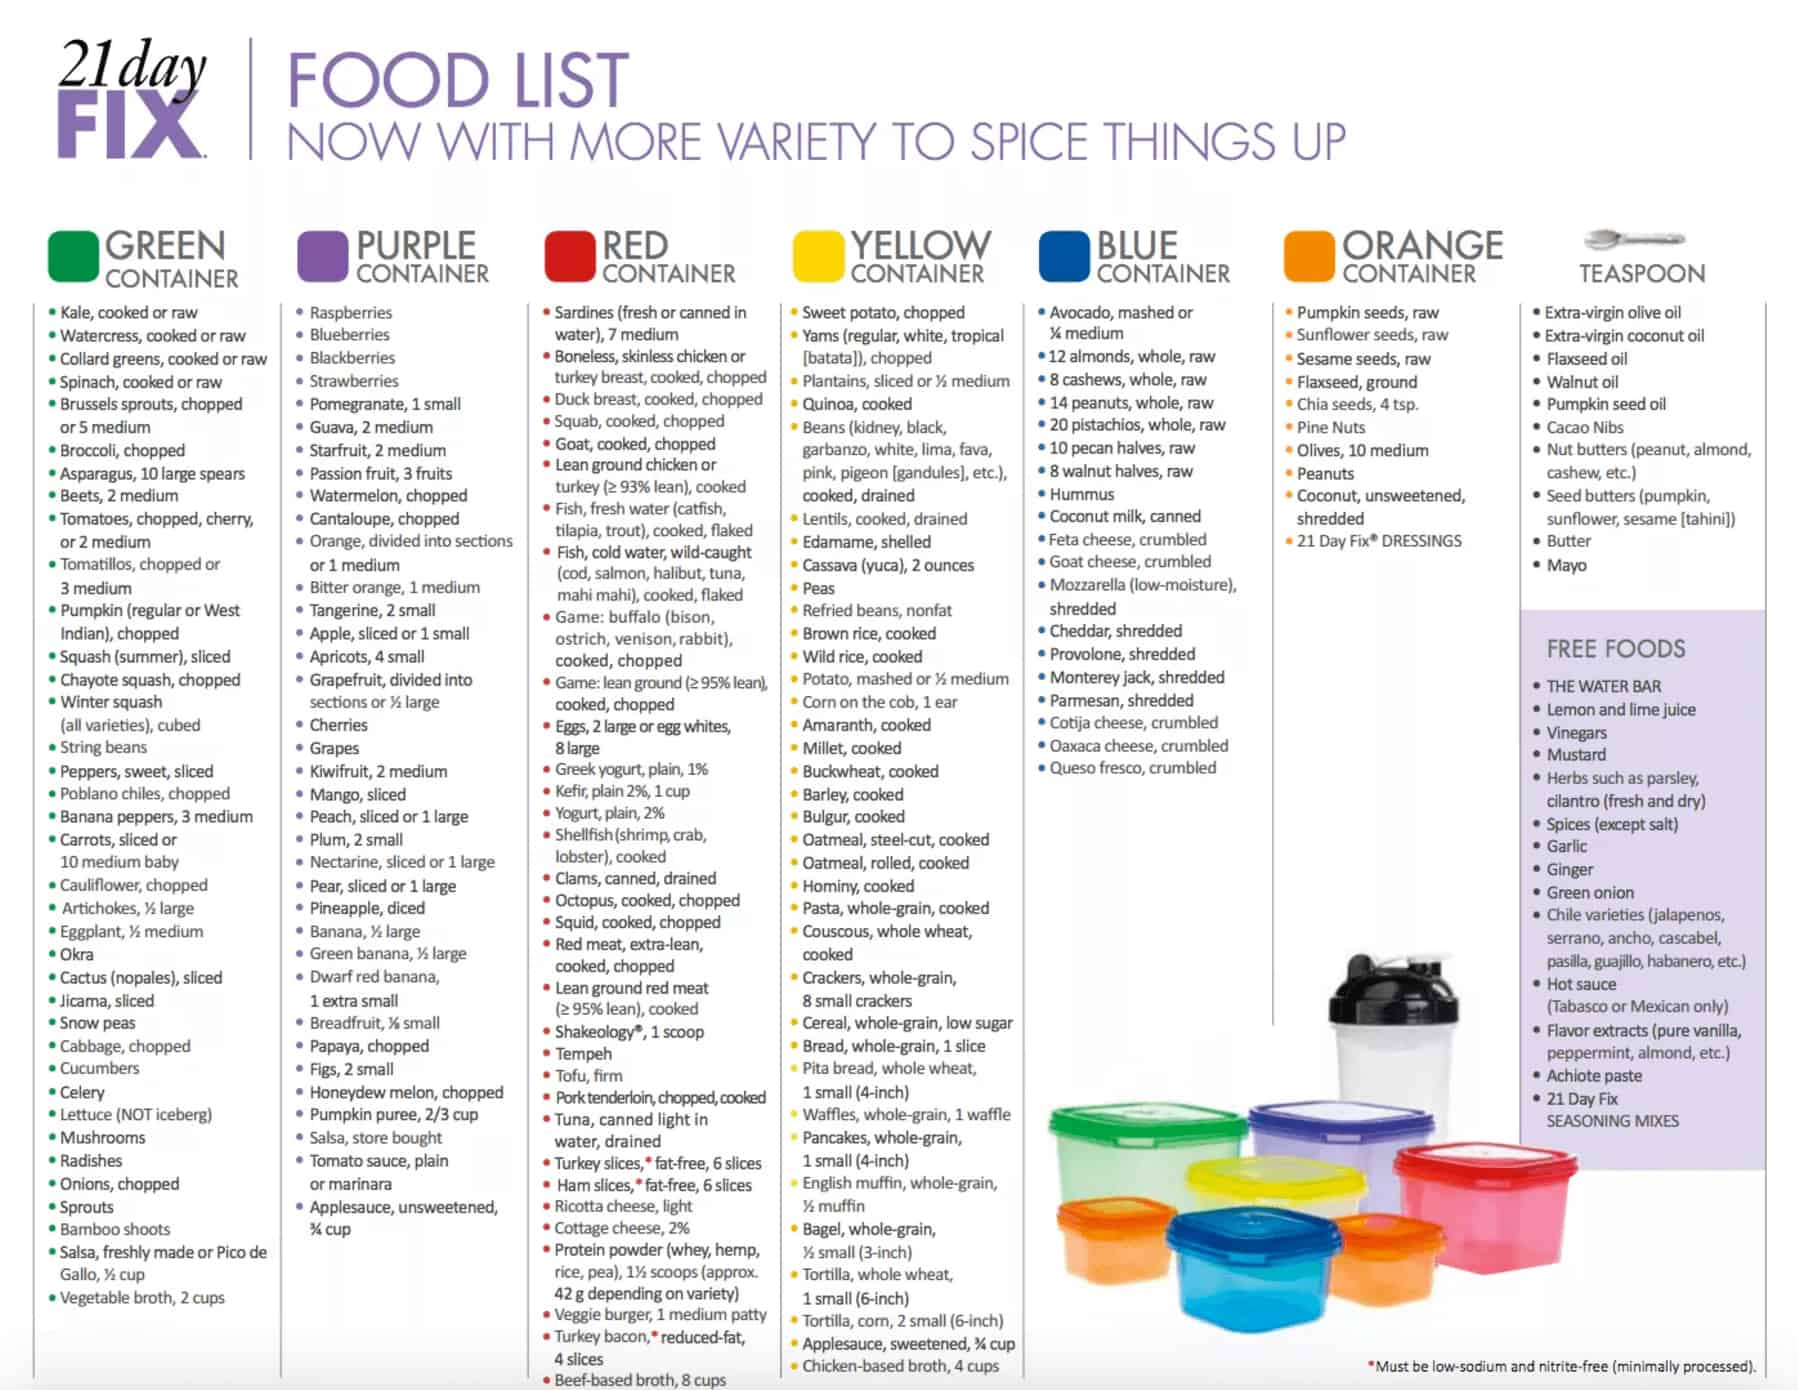 New 21 Day Fix Food List Printable - Plus 11 Simple Tips to Meal Prep